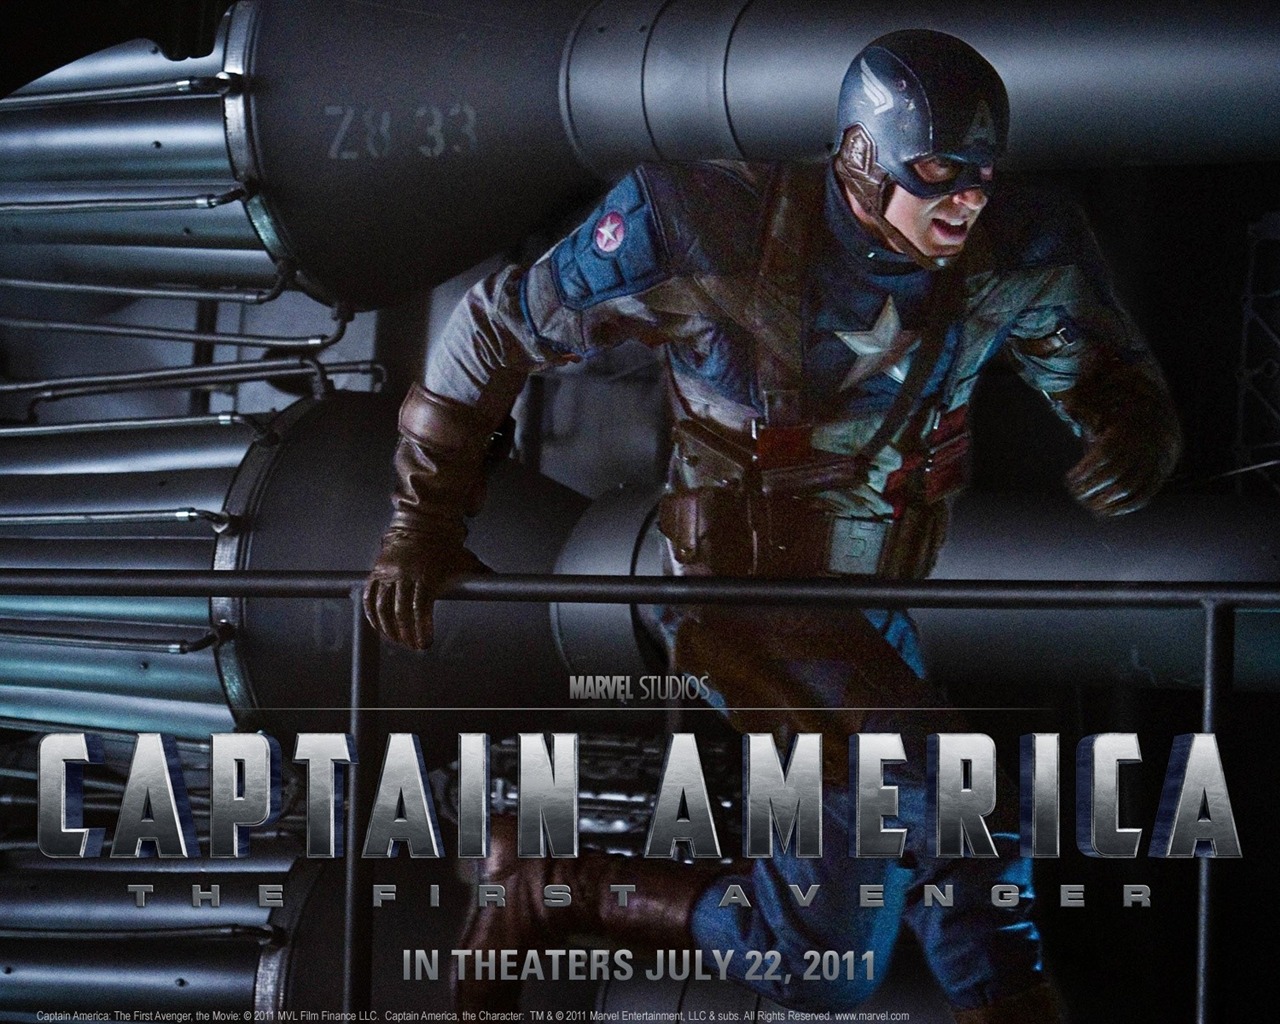 Captain America: The First Avenger wallpapers HD #20 - 1280x1024